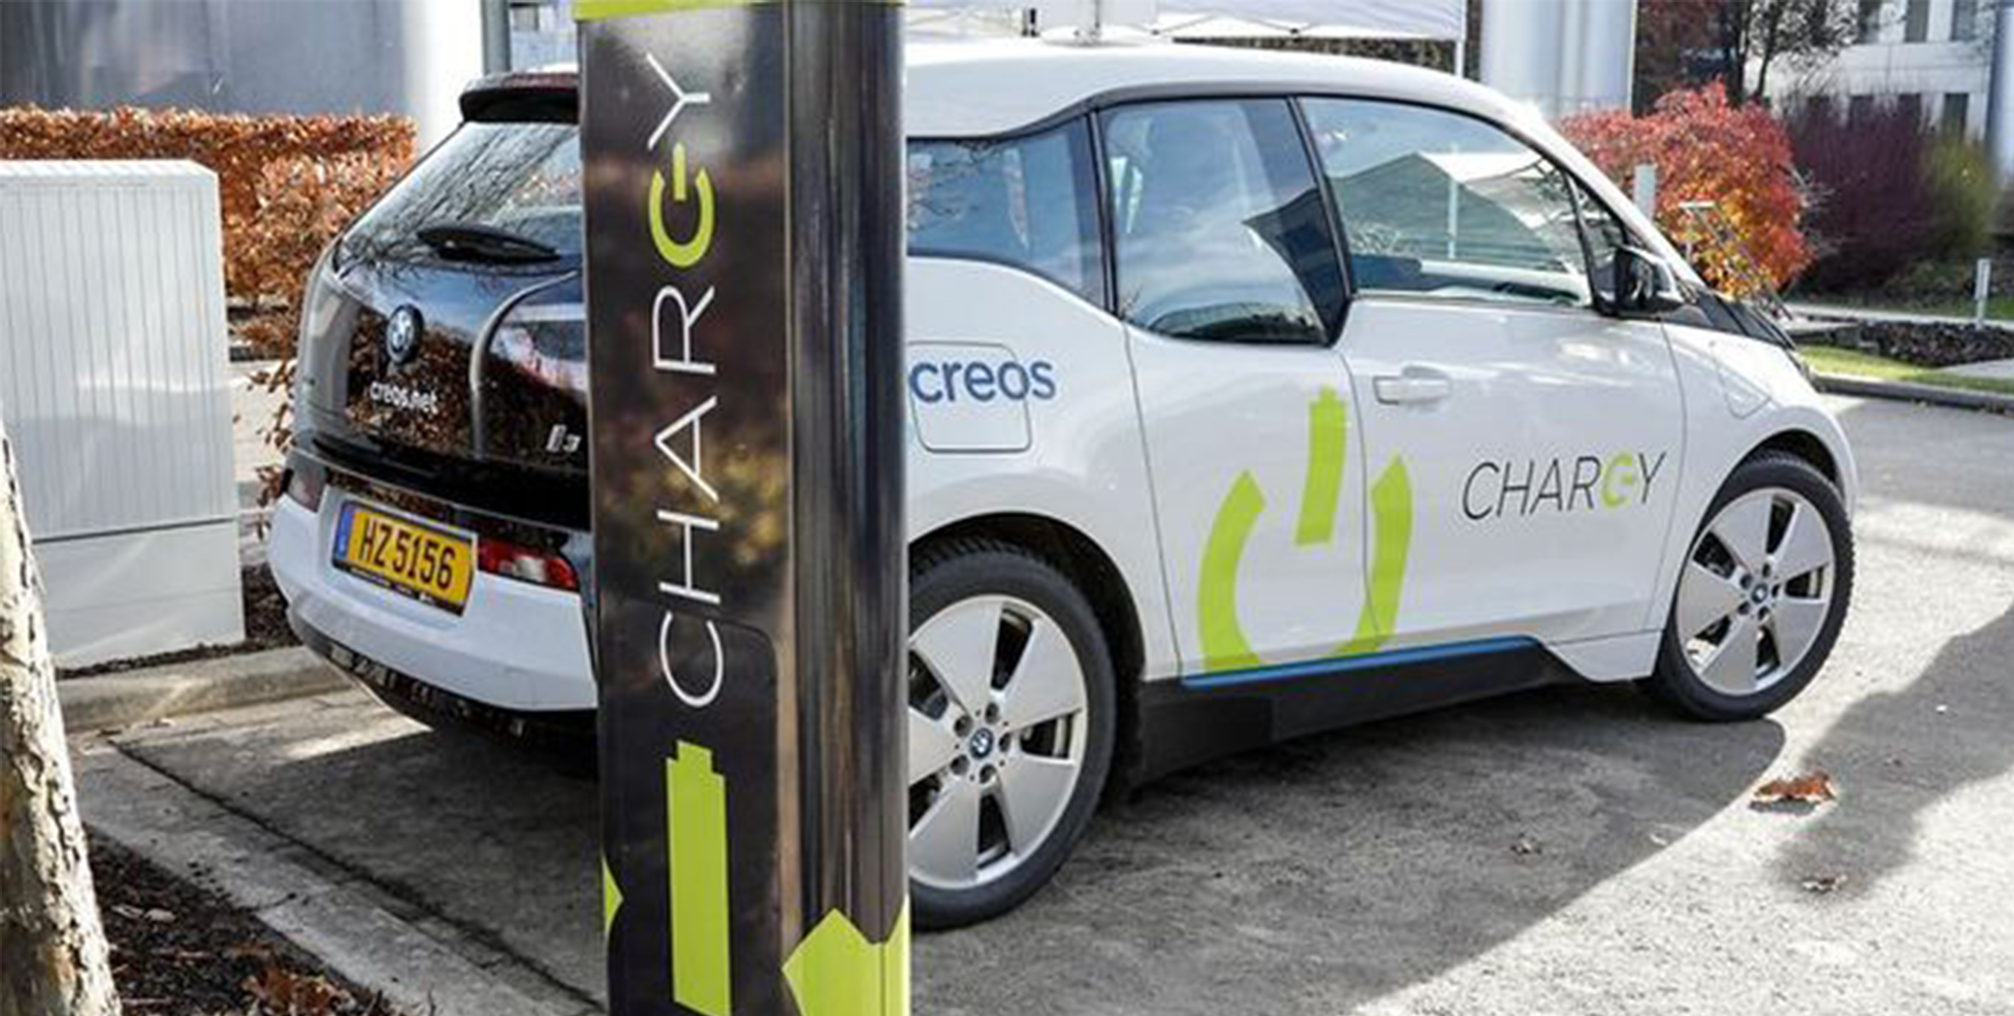 Chargy, an E-Mobility project and catalyst for the post carbon transition